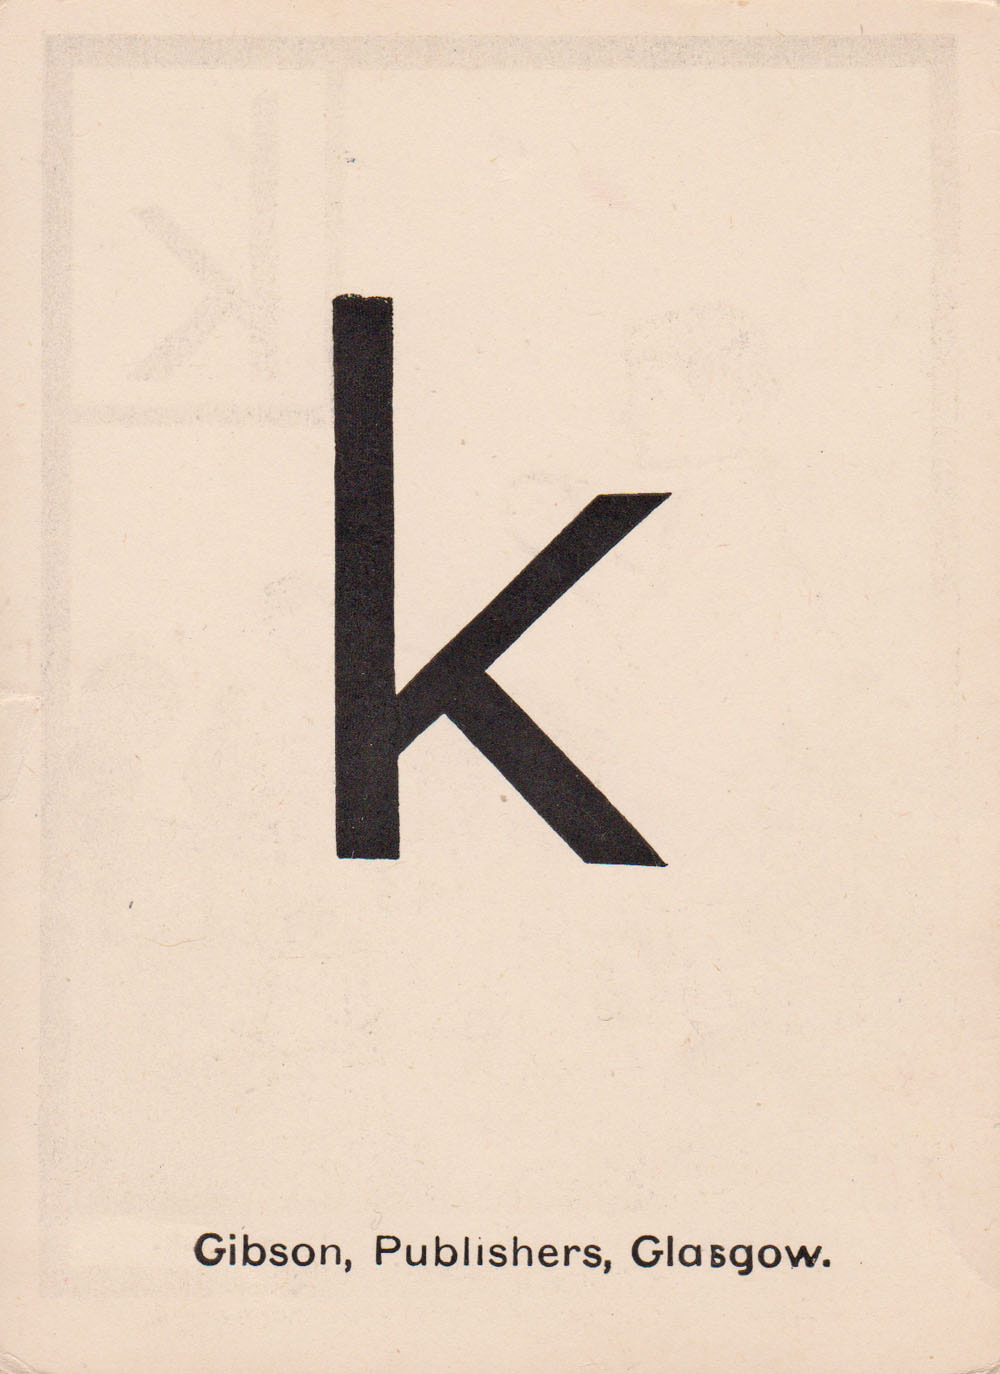 K (reverse) from the Play-way picture card set